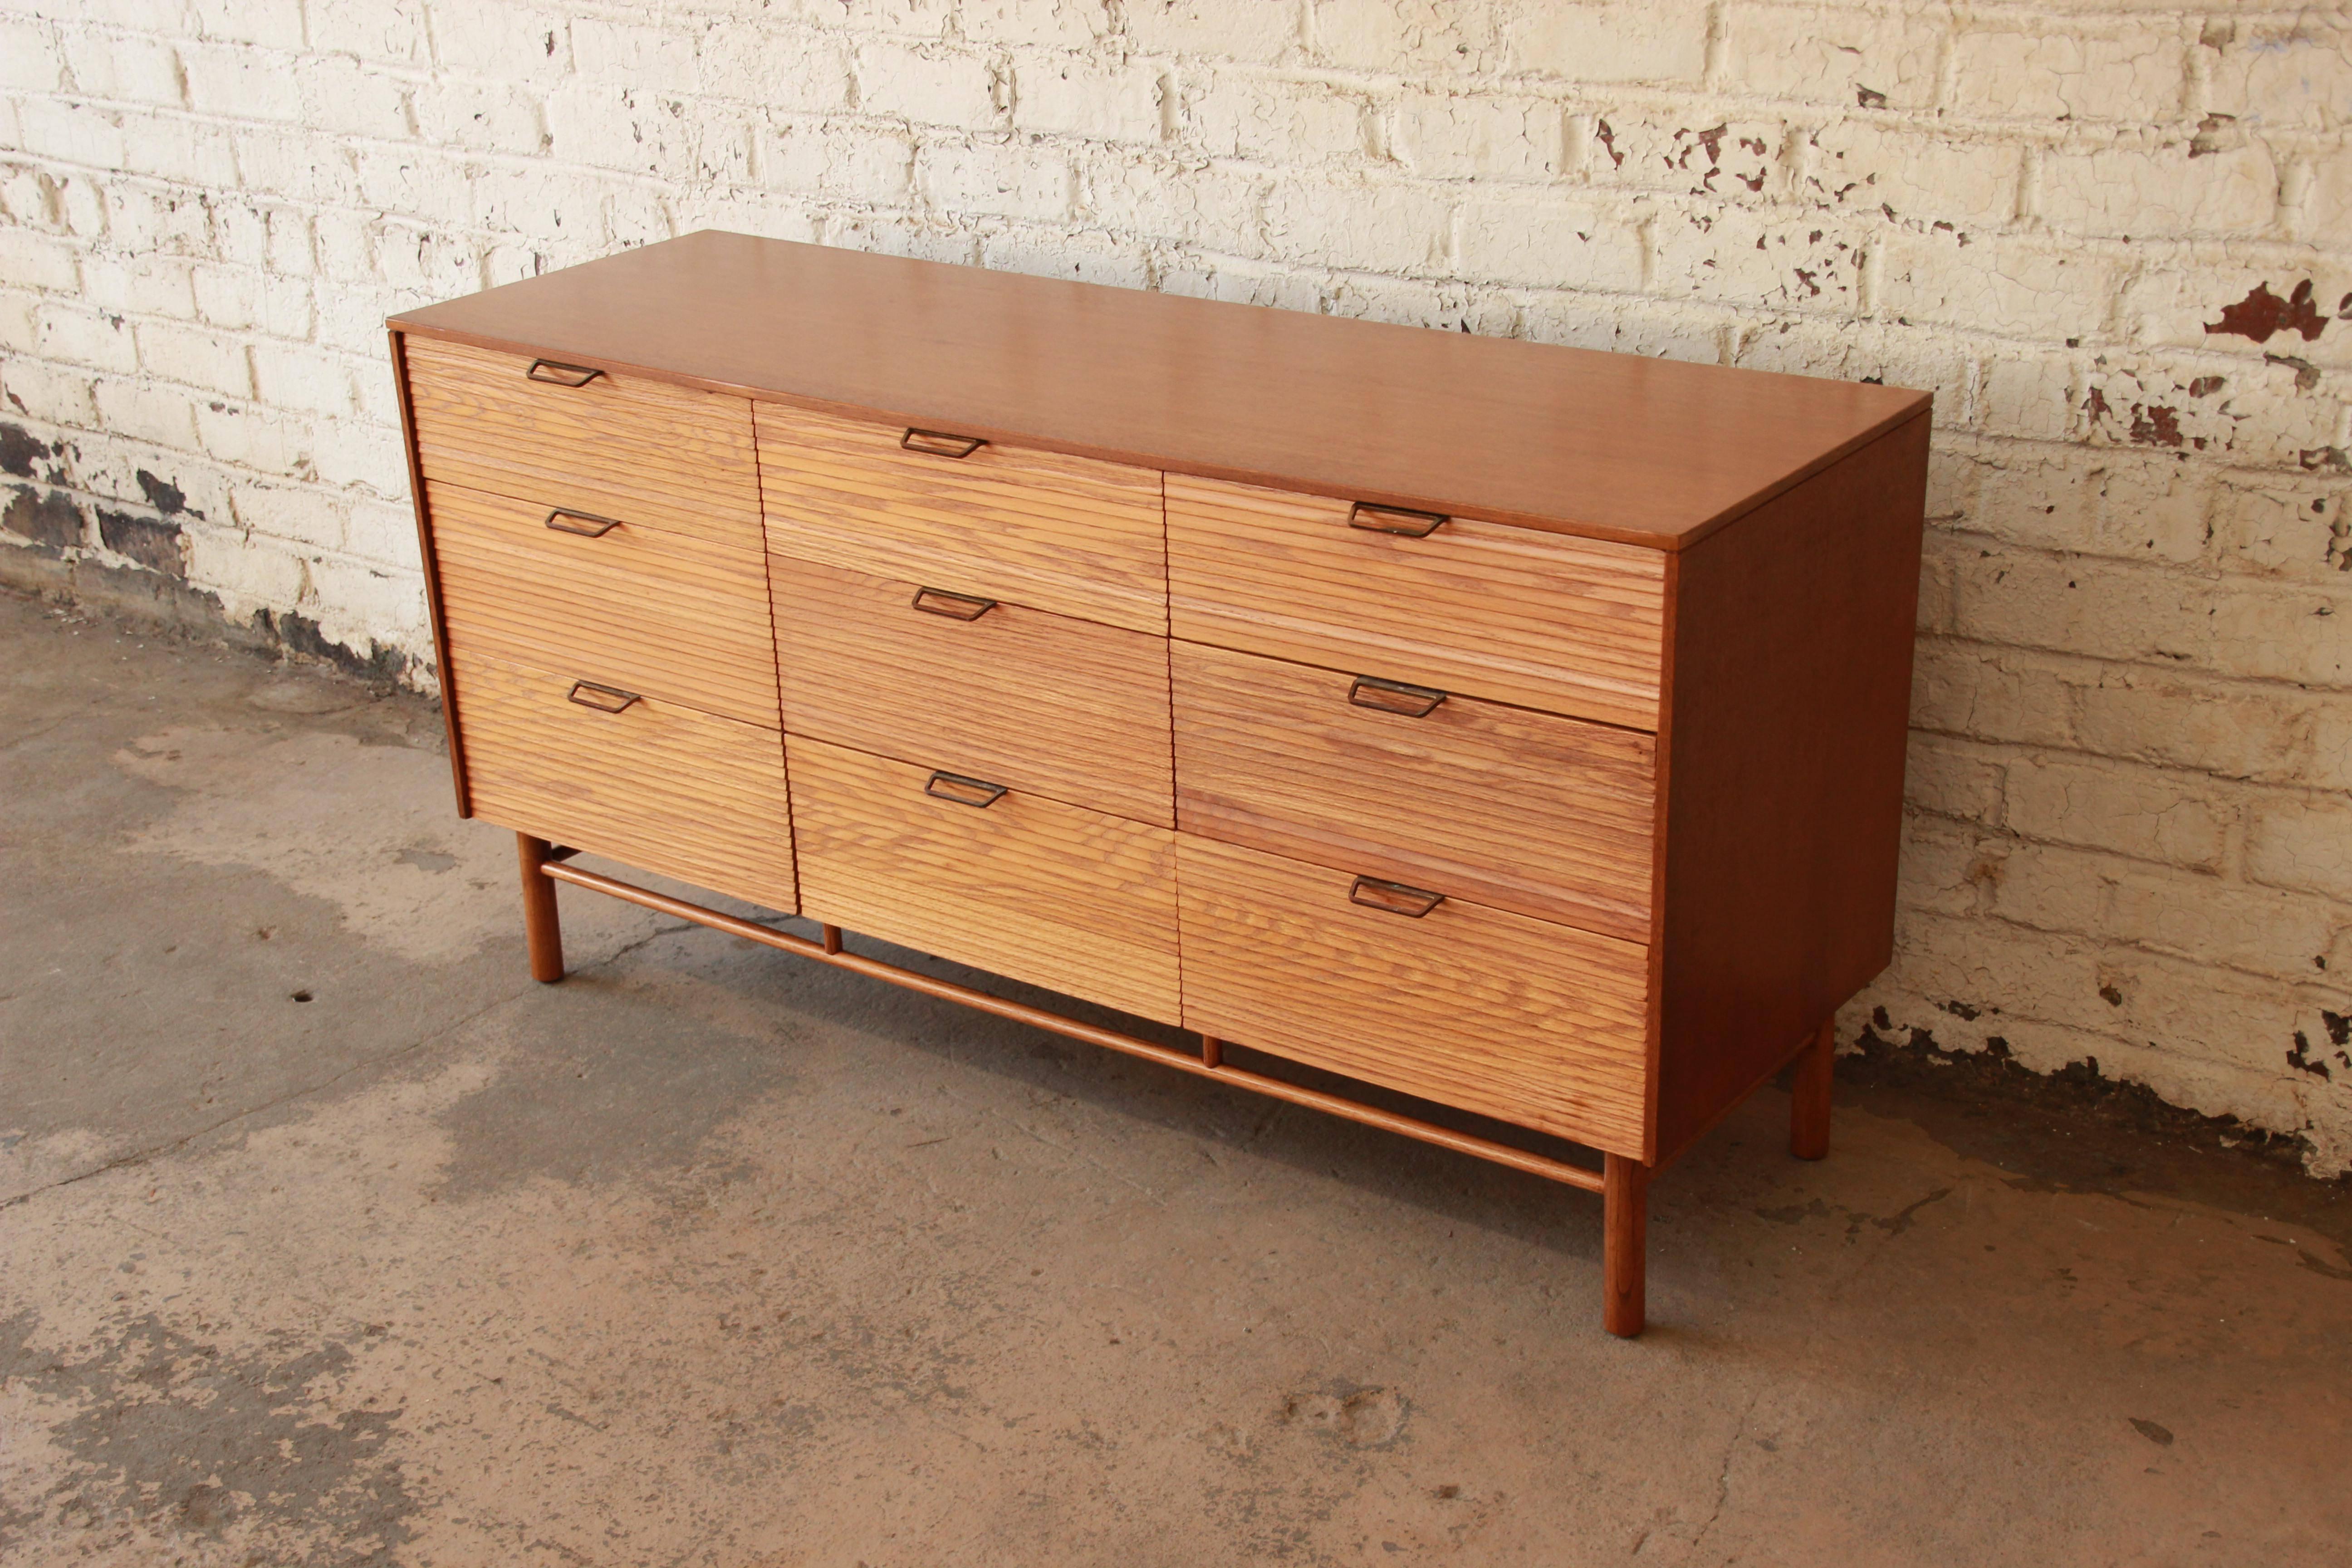 Two-toned Mid-Century Modern dresser by iconic designer Raymond Loewy for Mengel Furniture. The dresser features a unique louvered front and offers ample storage with nine deep drawers. A unique Loewy design, the dresser is finished in two tones,